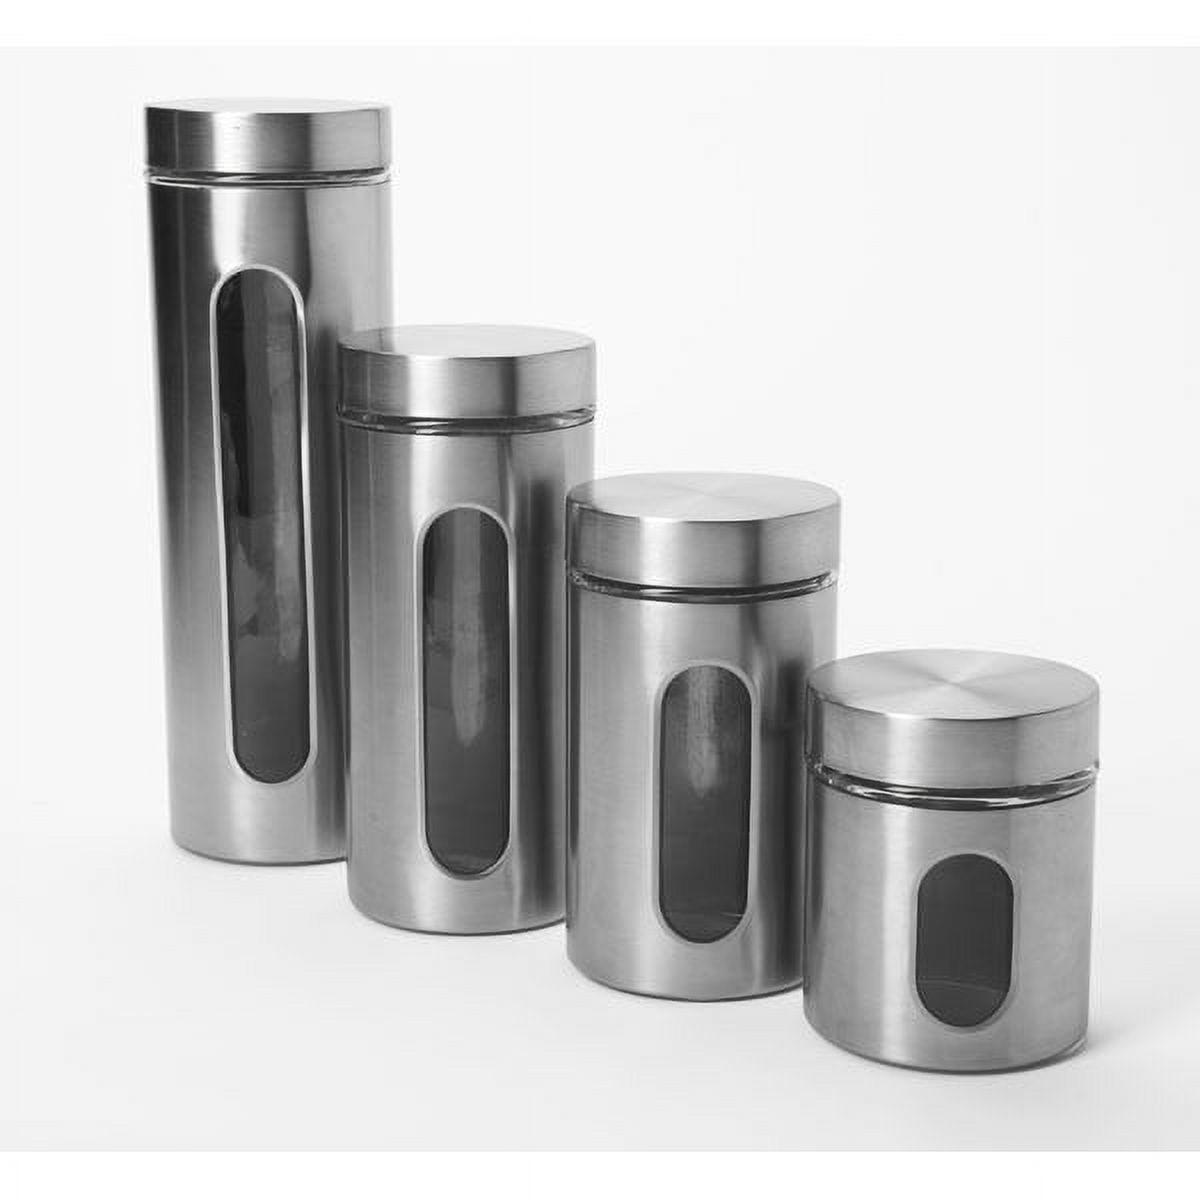 Anchor Hocking Food Canisters 4-Piece Palladian Window Set in Stainless Steel 97564A - image 2 of 2